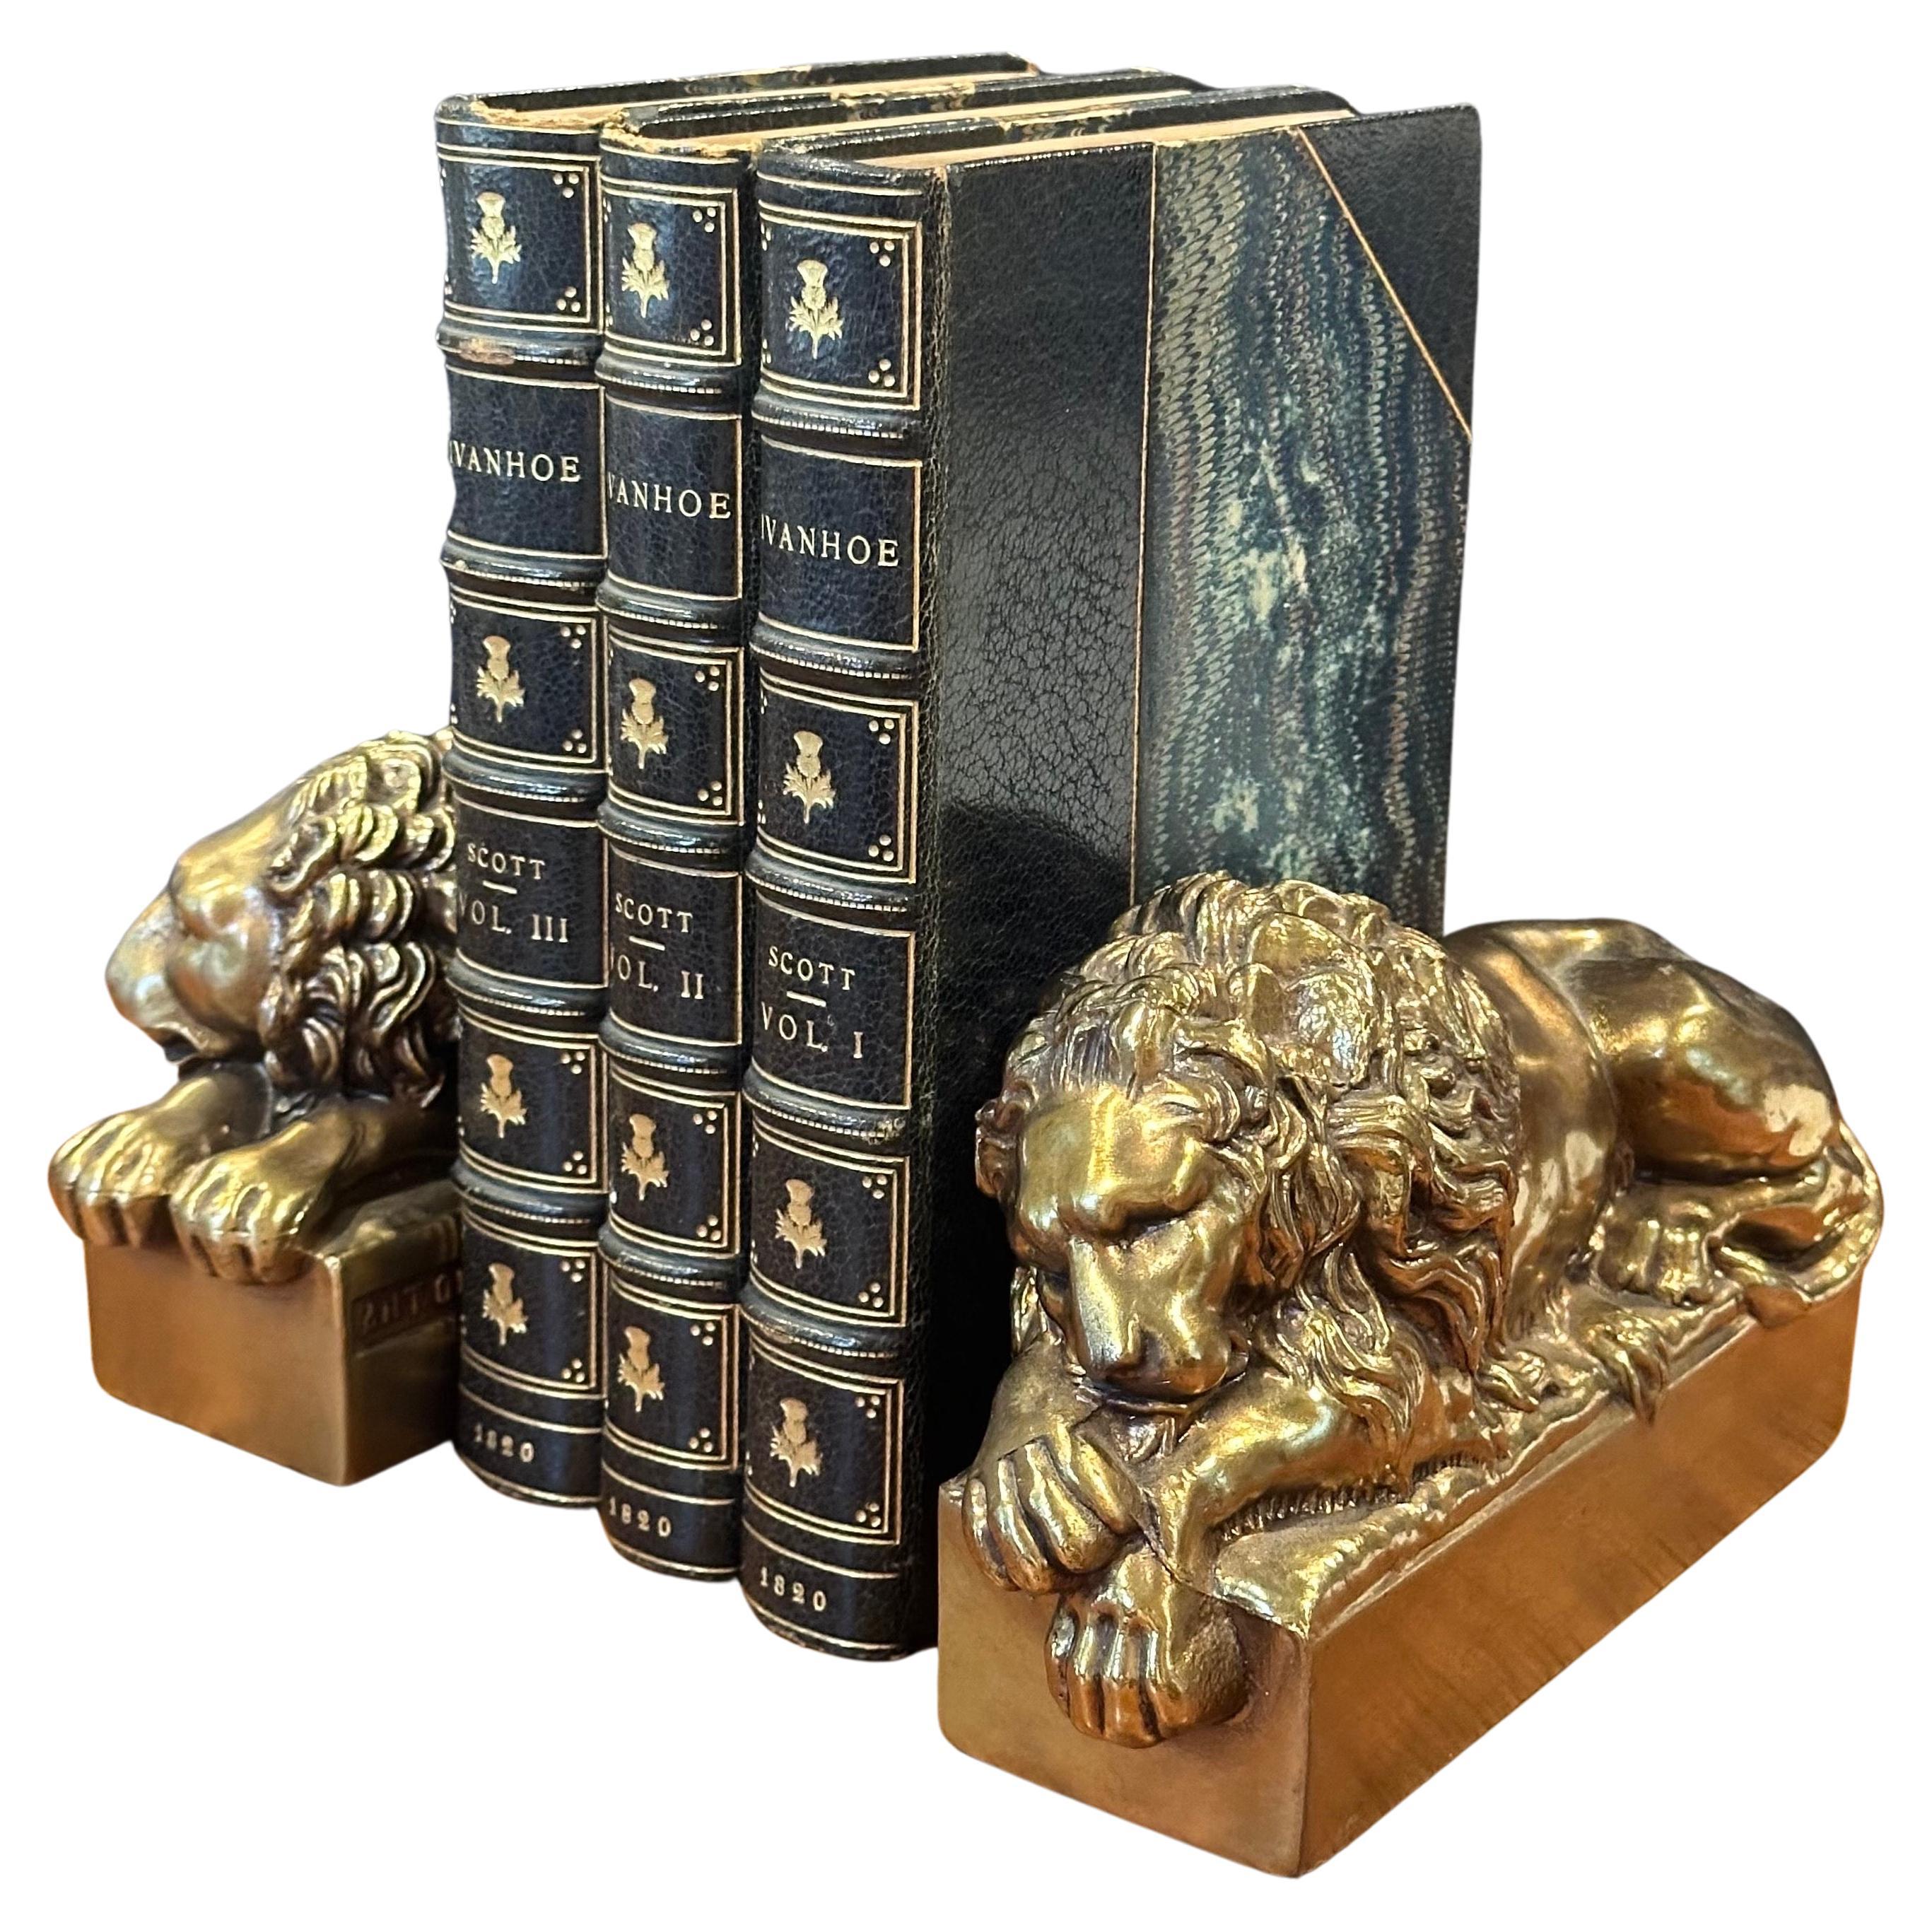 Pair of cast brass lion bookends by Antonio Canova, circa 1940s.  These lions were originally sculpted by Antonio Canova (Italian, 1757-1822) in larger scale for the tomb of Pope Clement XIII in St. Peter’s Basilica. The Sleeping lion pictured is